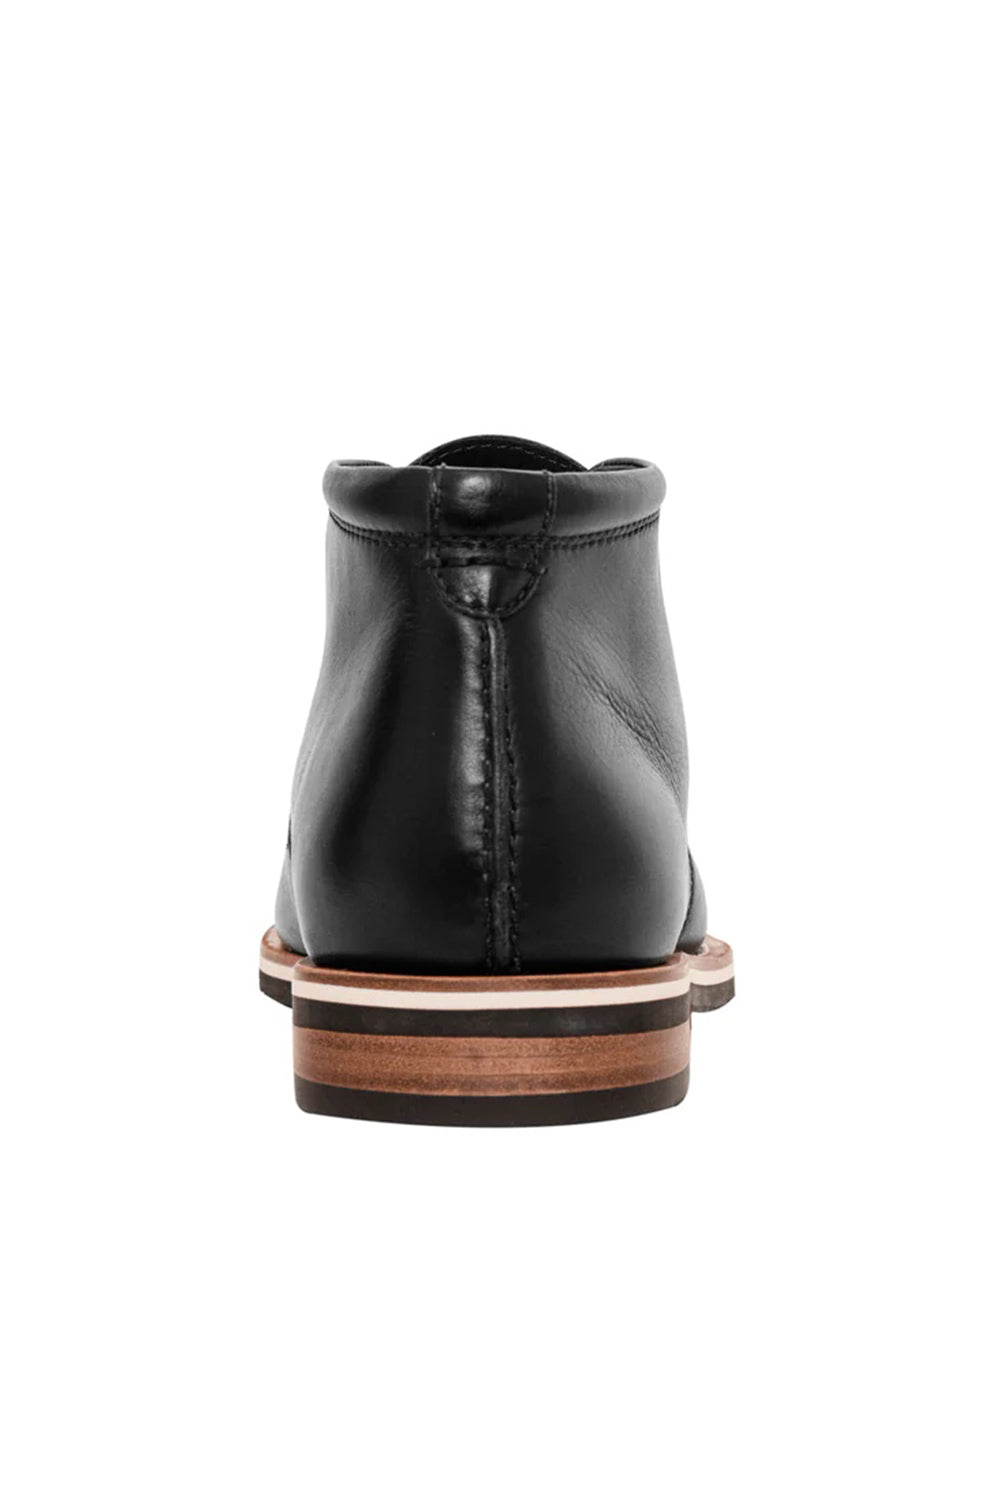 Helm Boots - The Hynes - Black - Back